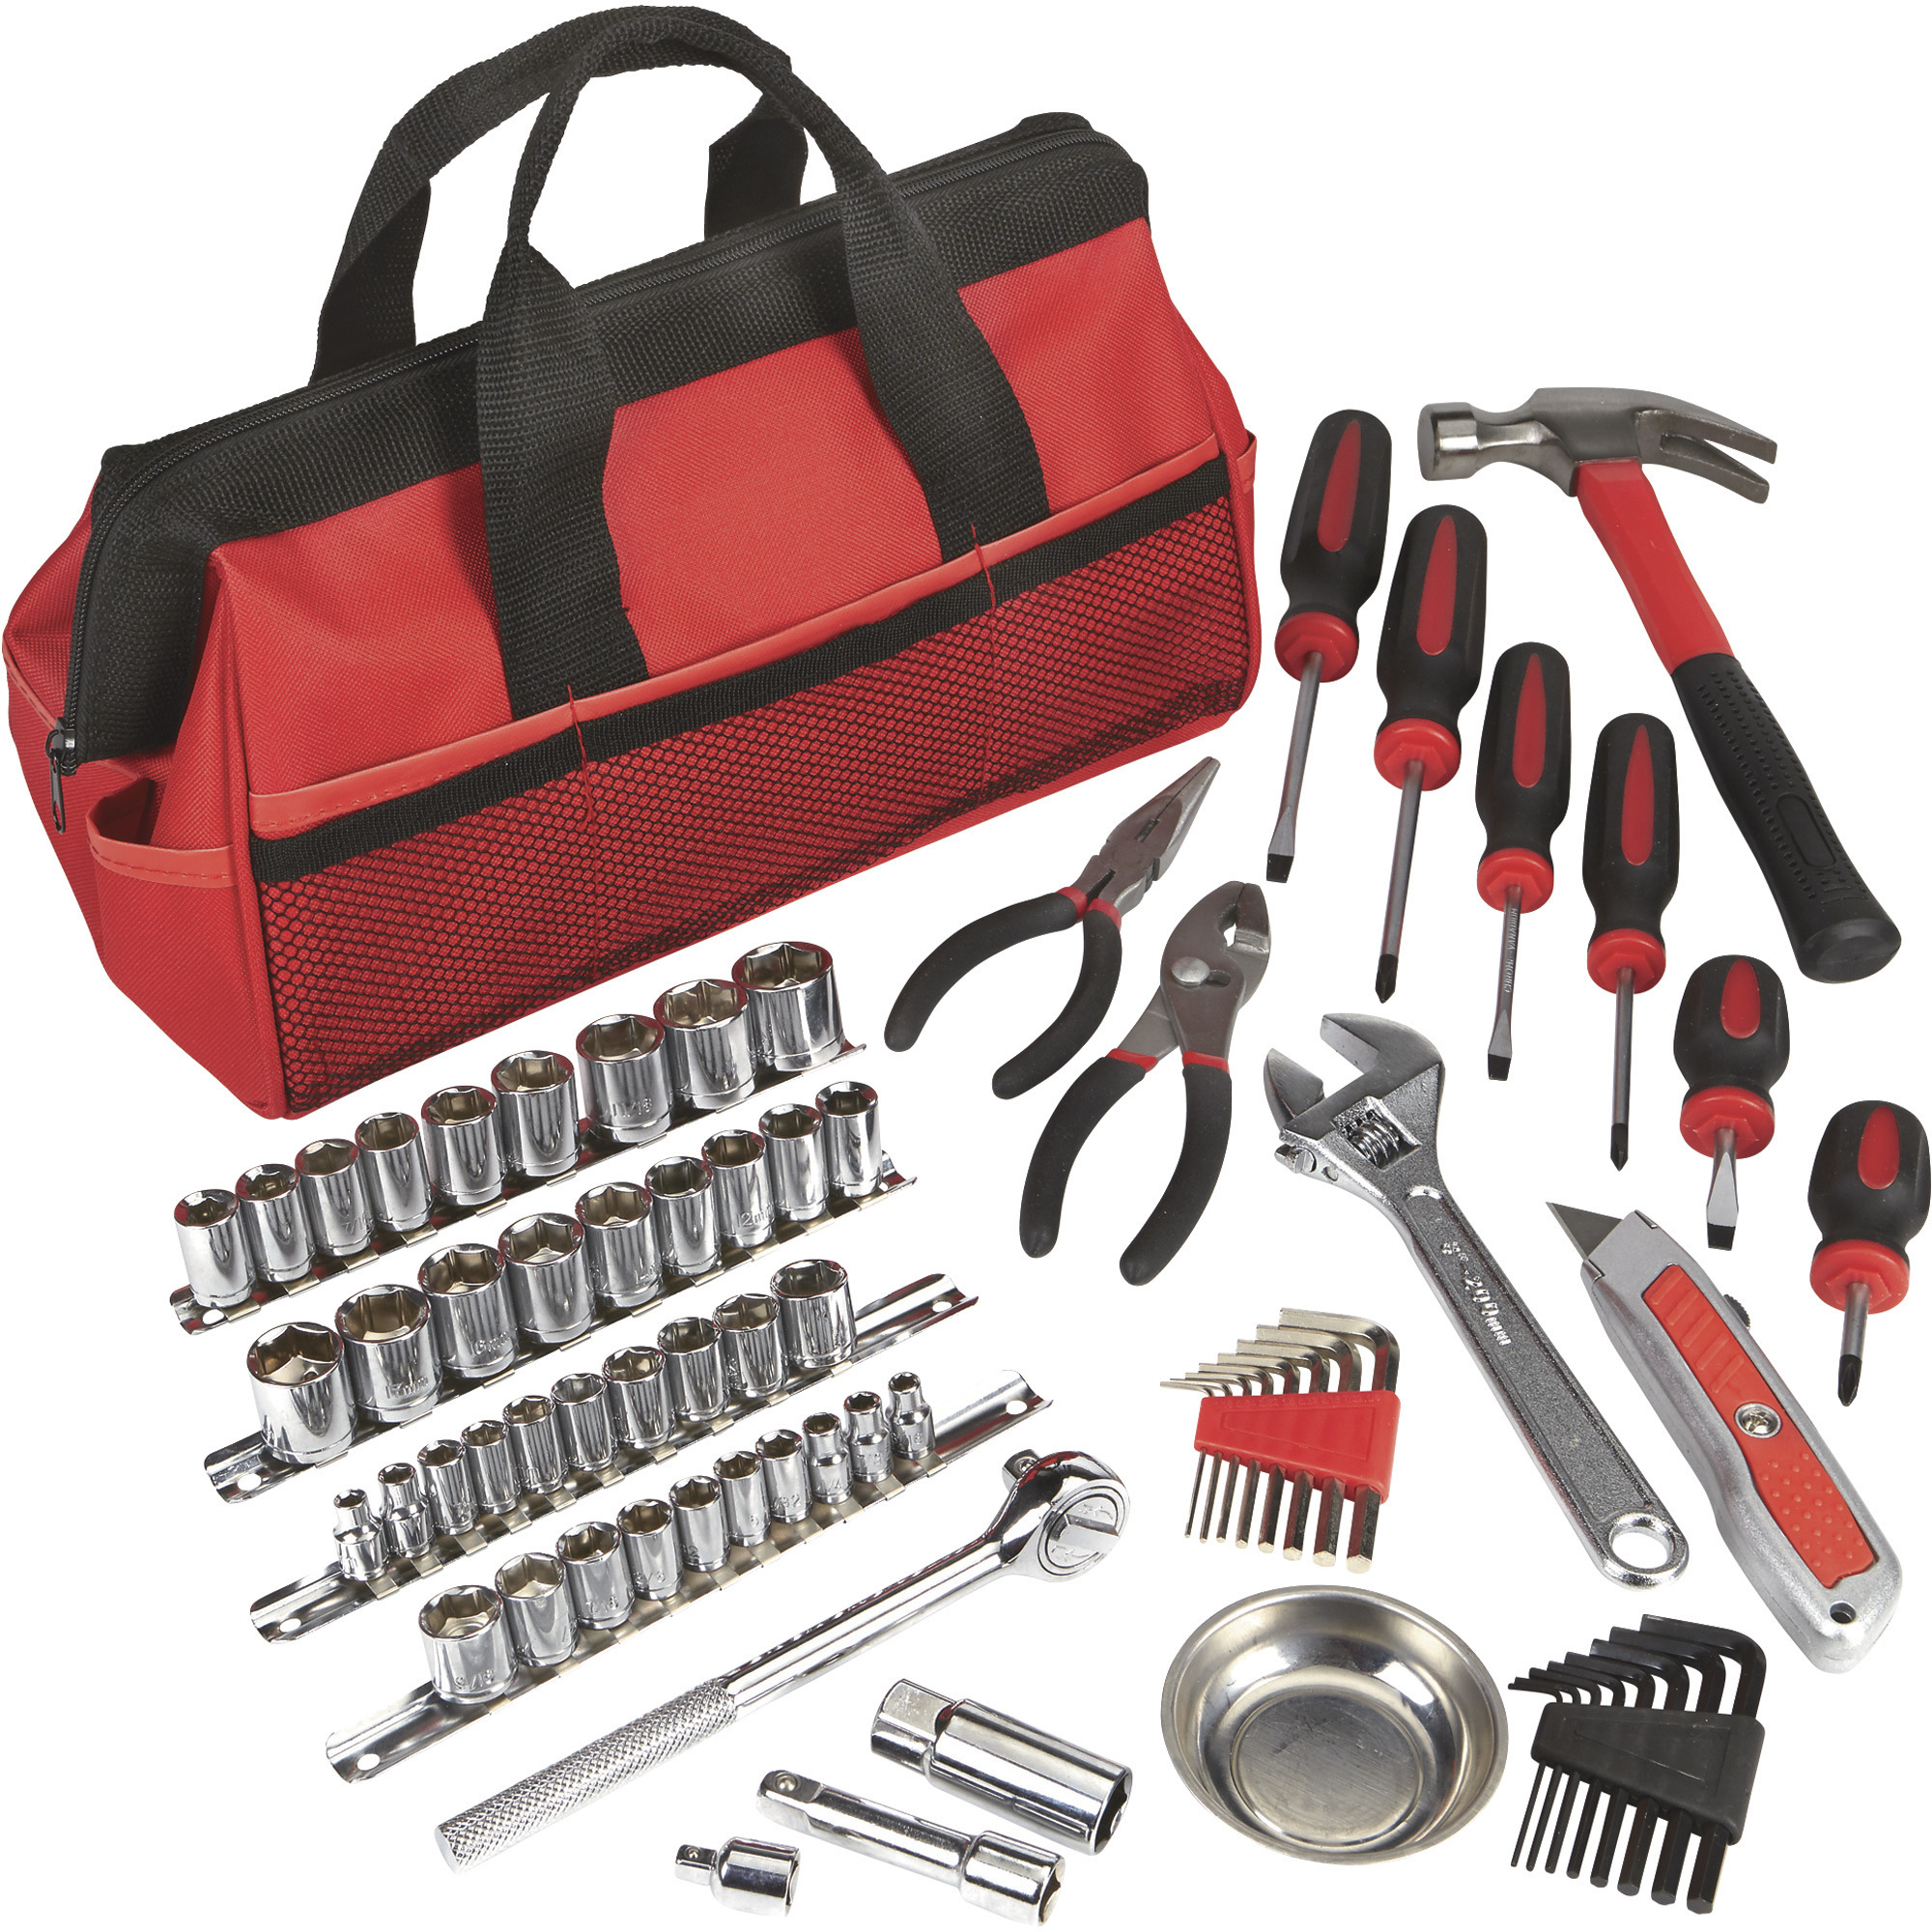 Northern Tool + Equipment Father's Day Sale: Up to 50% off on Select items